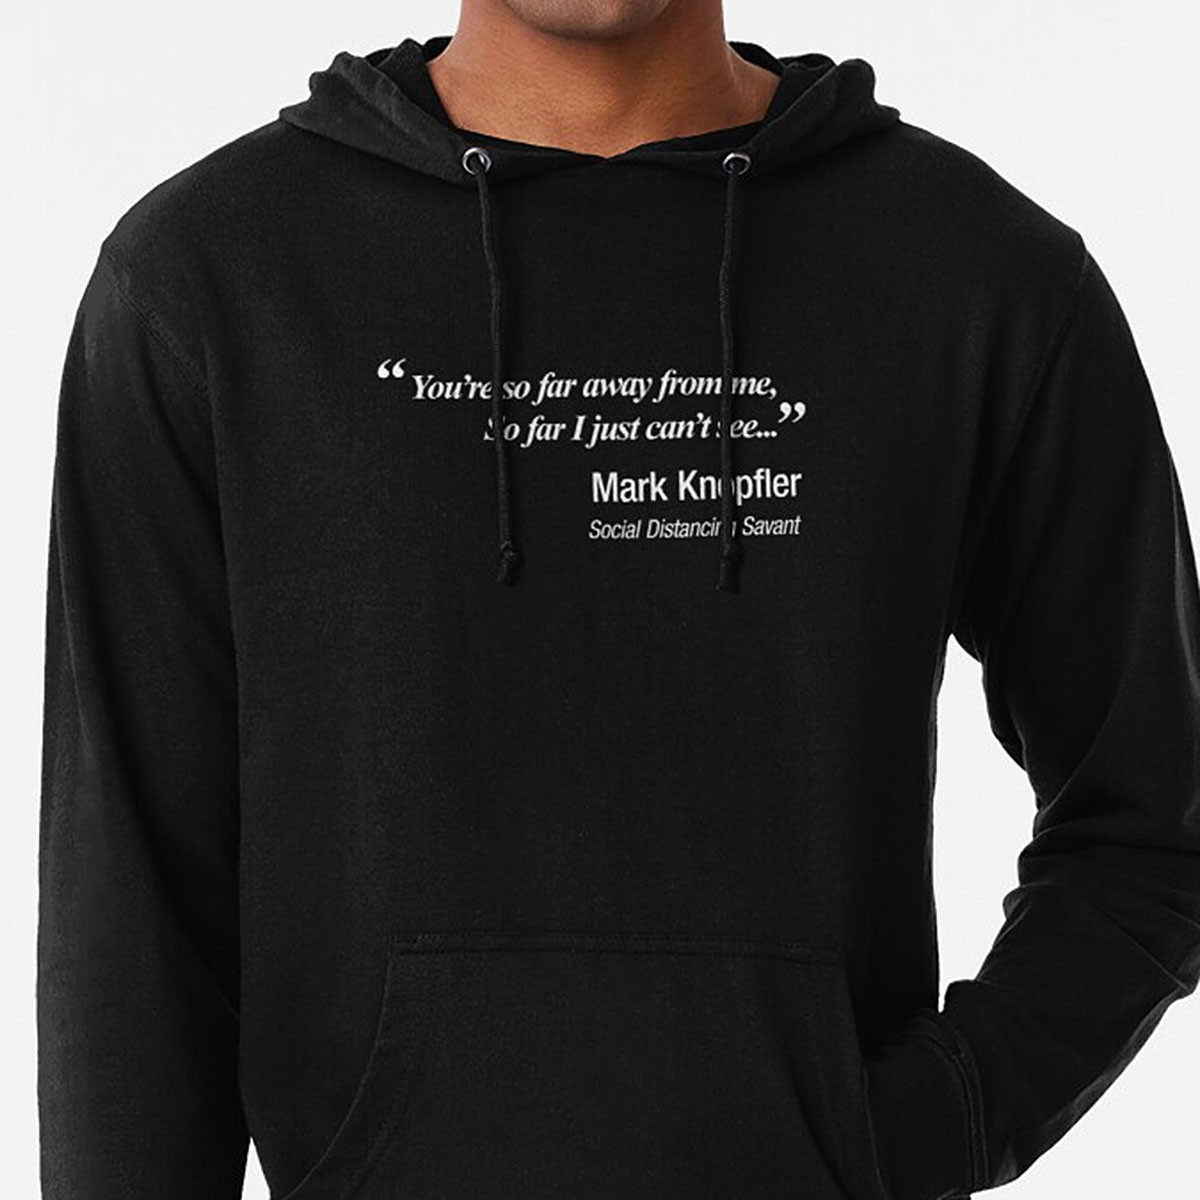 You're so far away from me - Dire Straits/ Mark Knopfler Parody Lightweight Hoodie by NTK Apparel